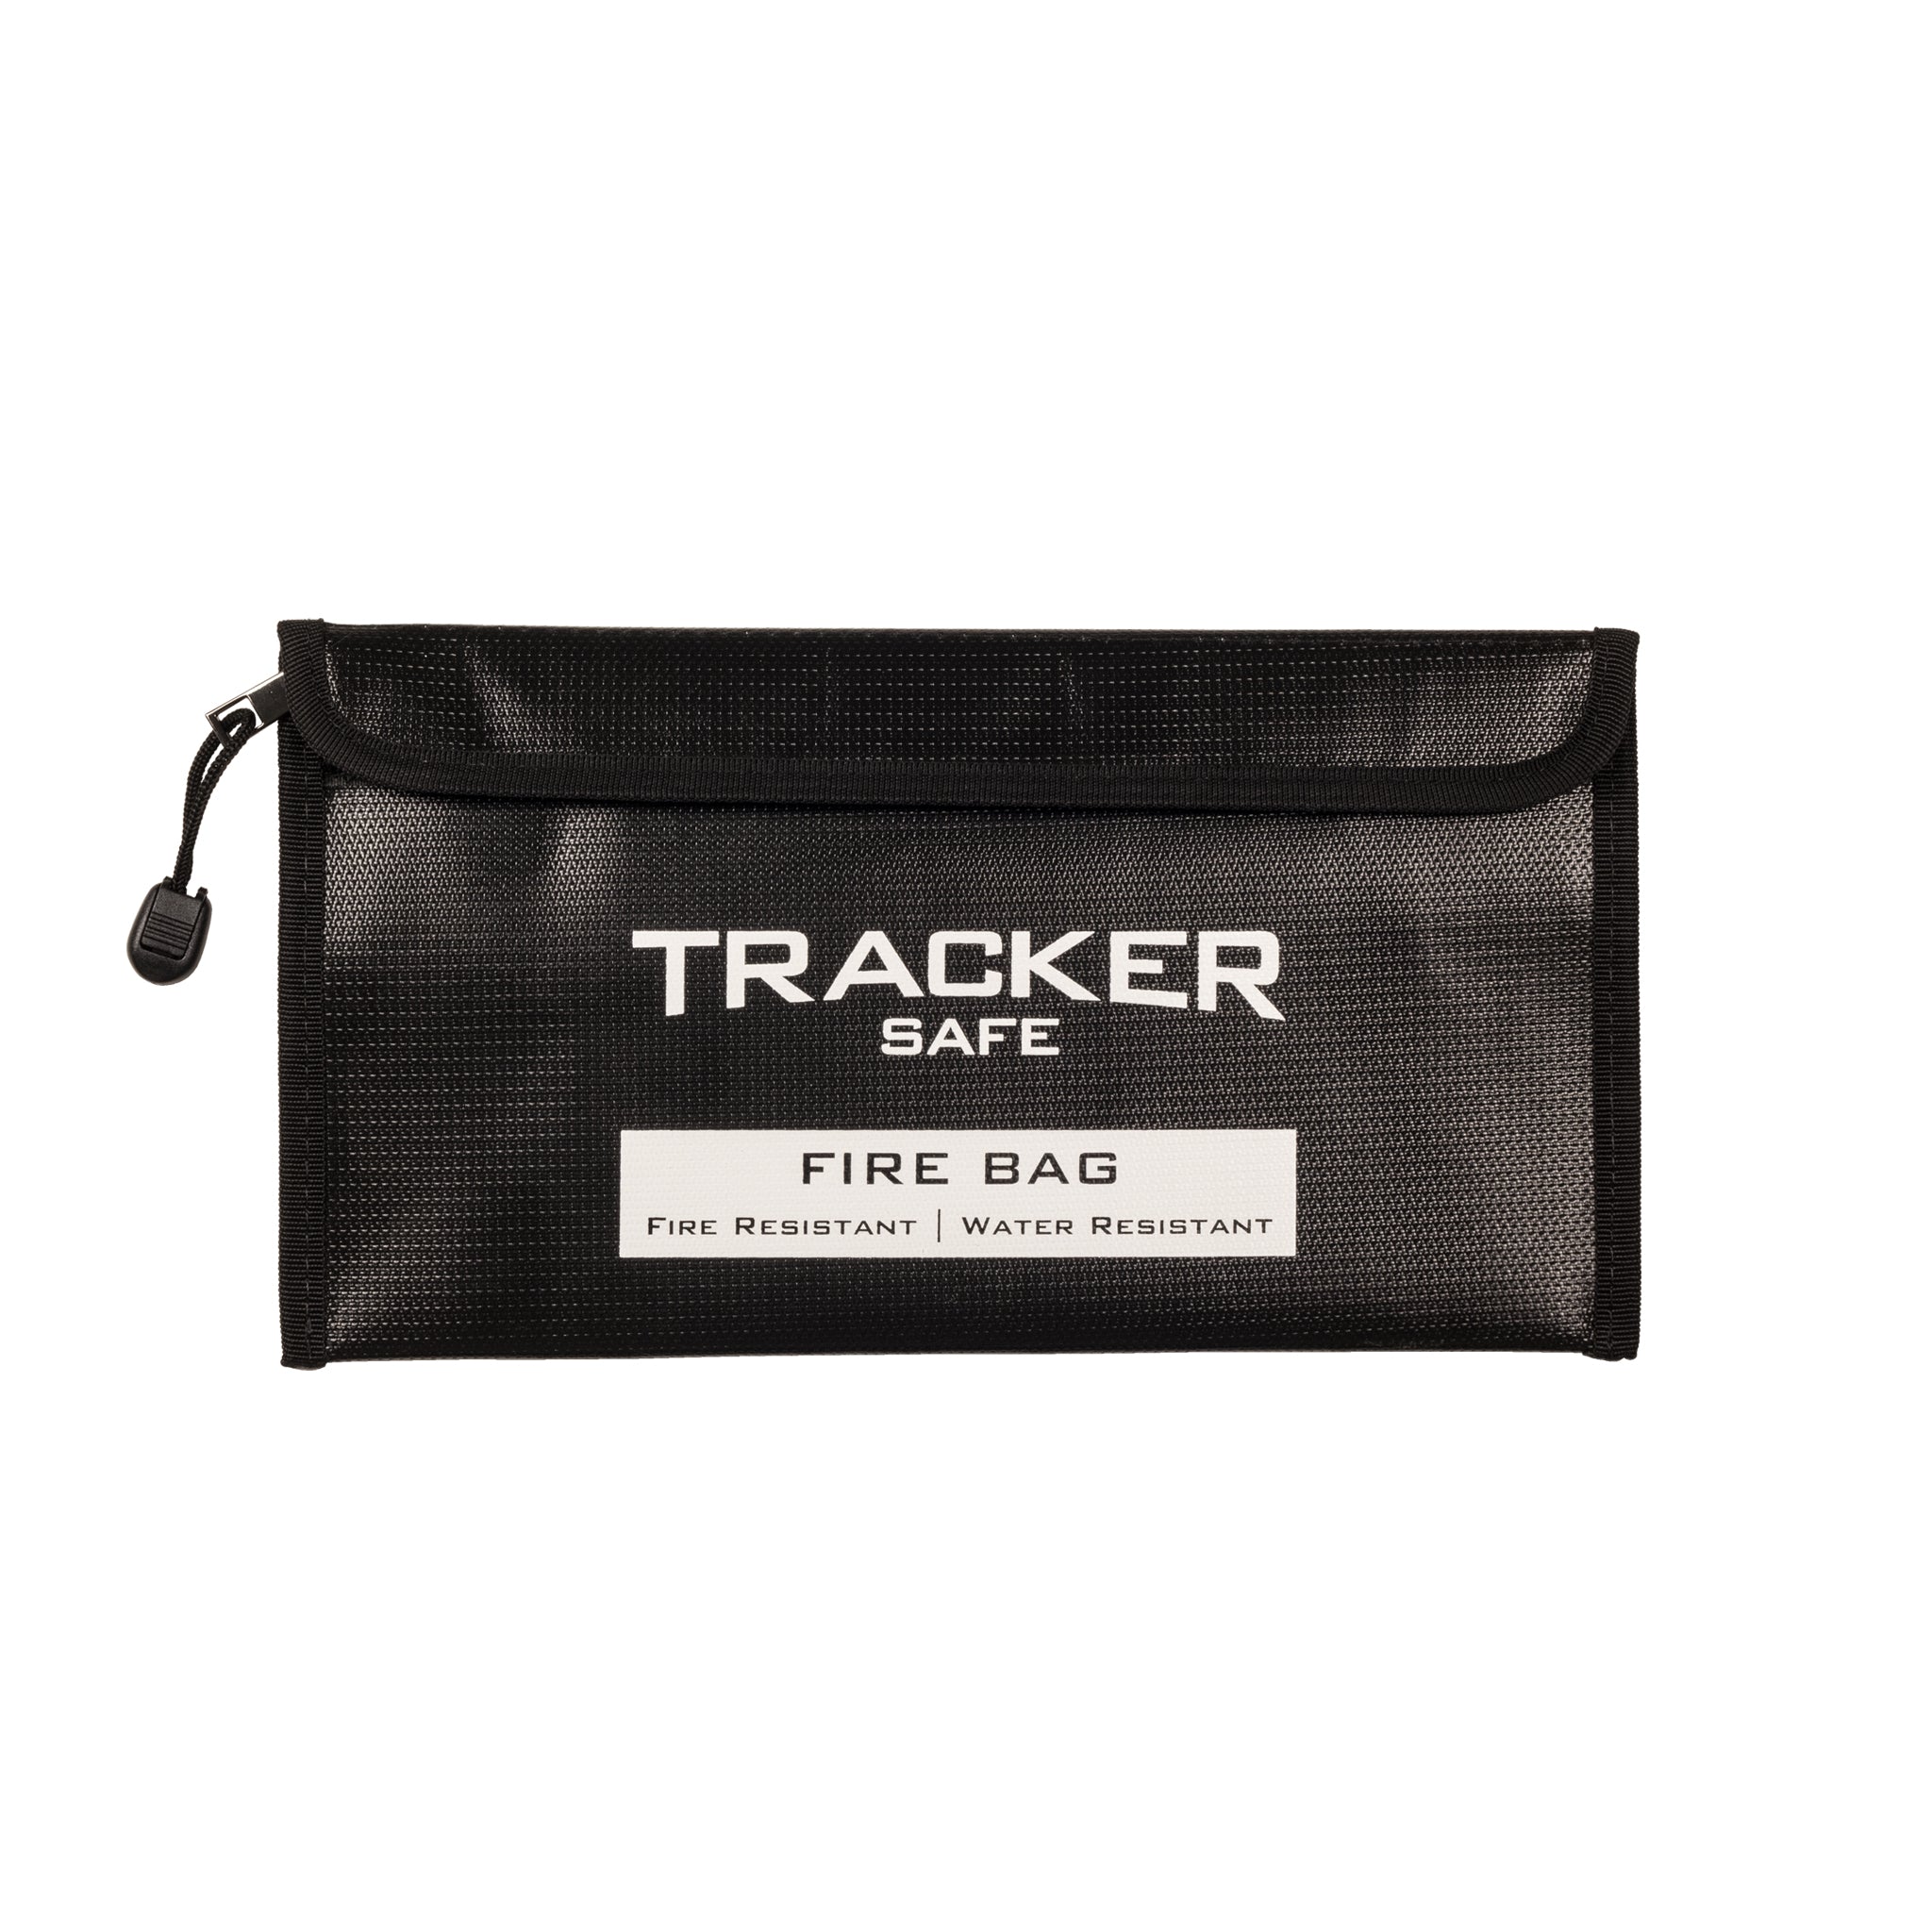 Tracker Safe 12 in. x 16 in. x 5 in. Fire and Water Resistant Bag